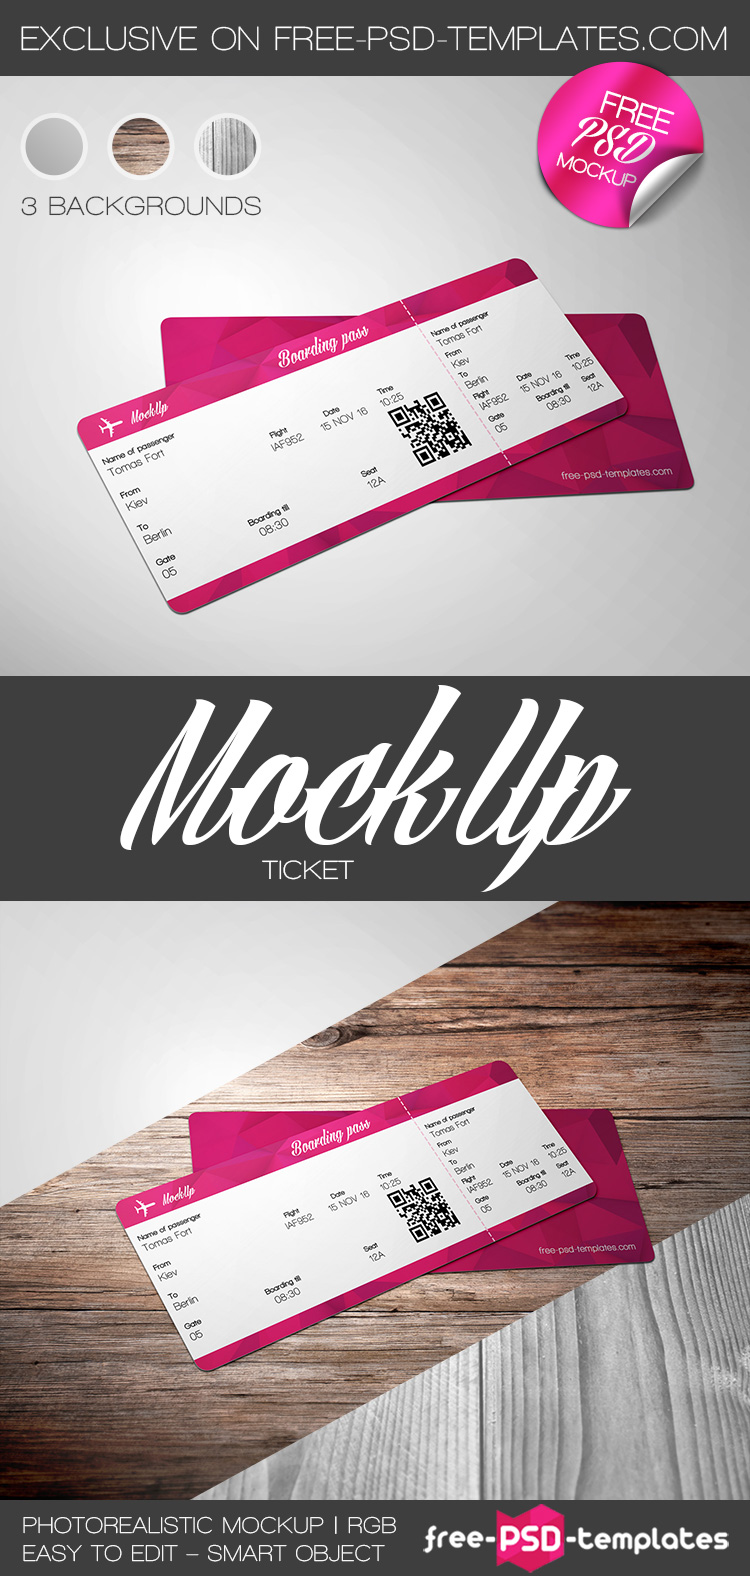 Download Free Ticket Mock-up in PSD | Free PSD Templates